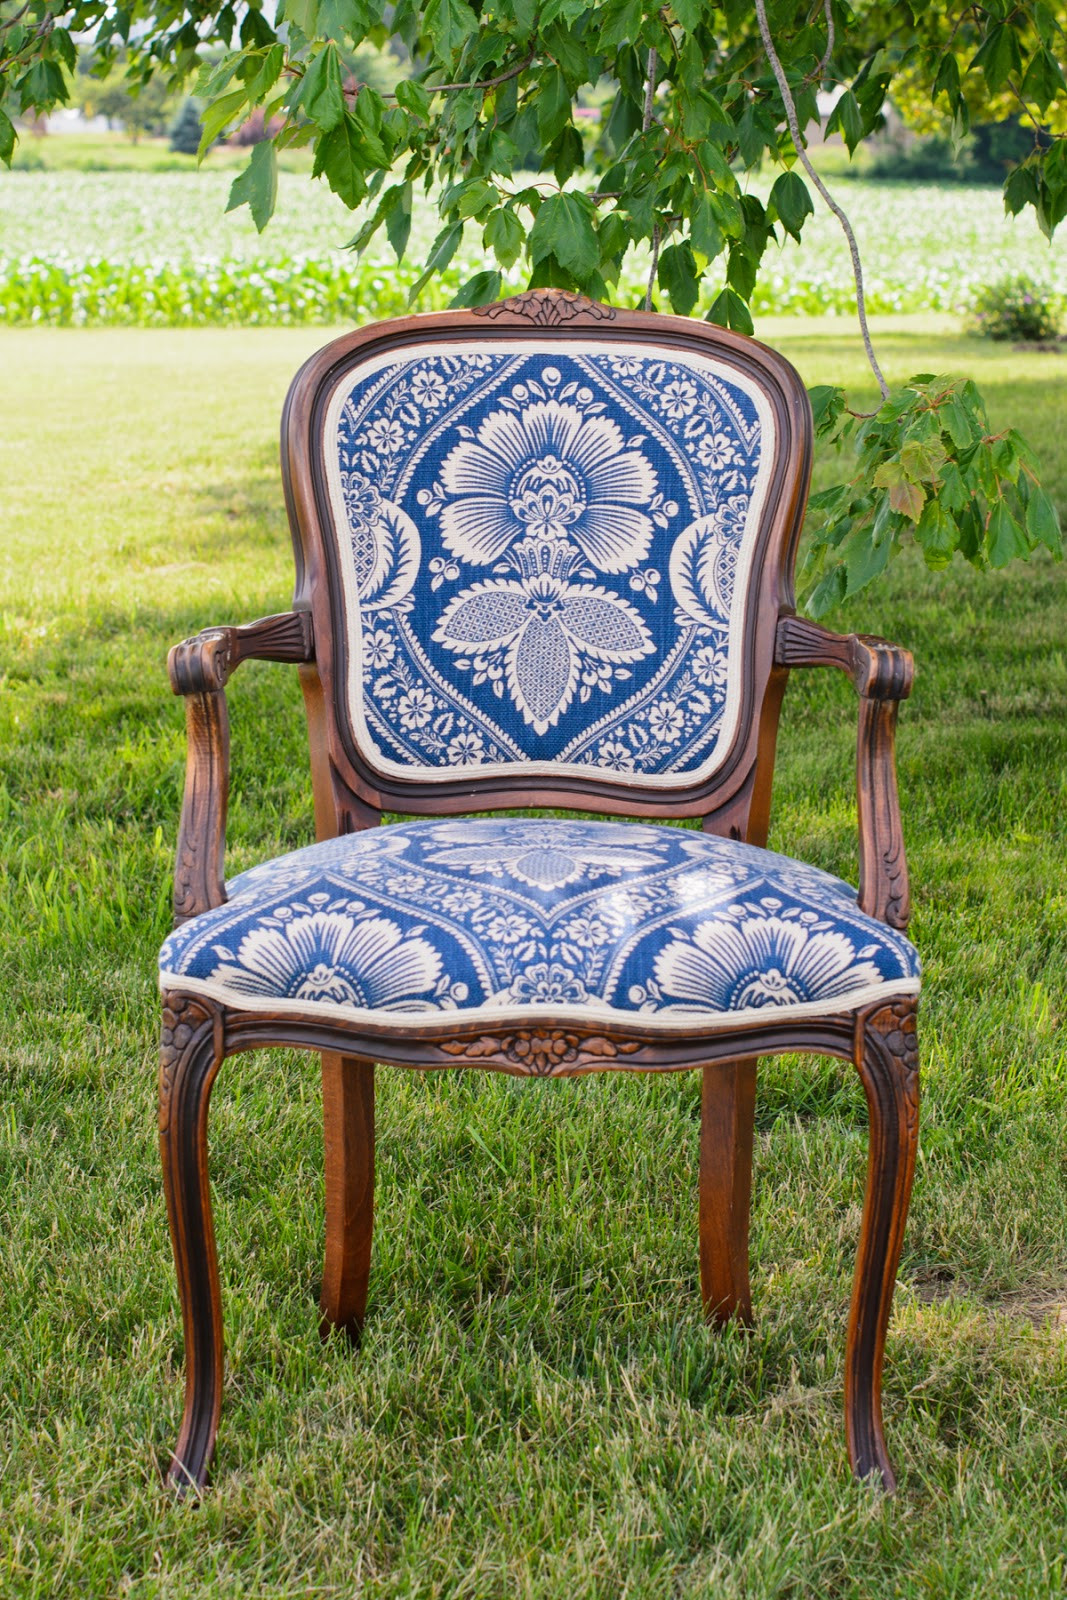 Farmhouse Living Room Chairs
 Gracious Farmhouse Living Room Time Out Chairs